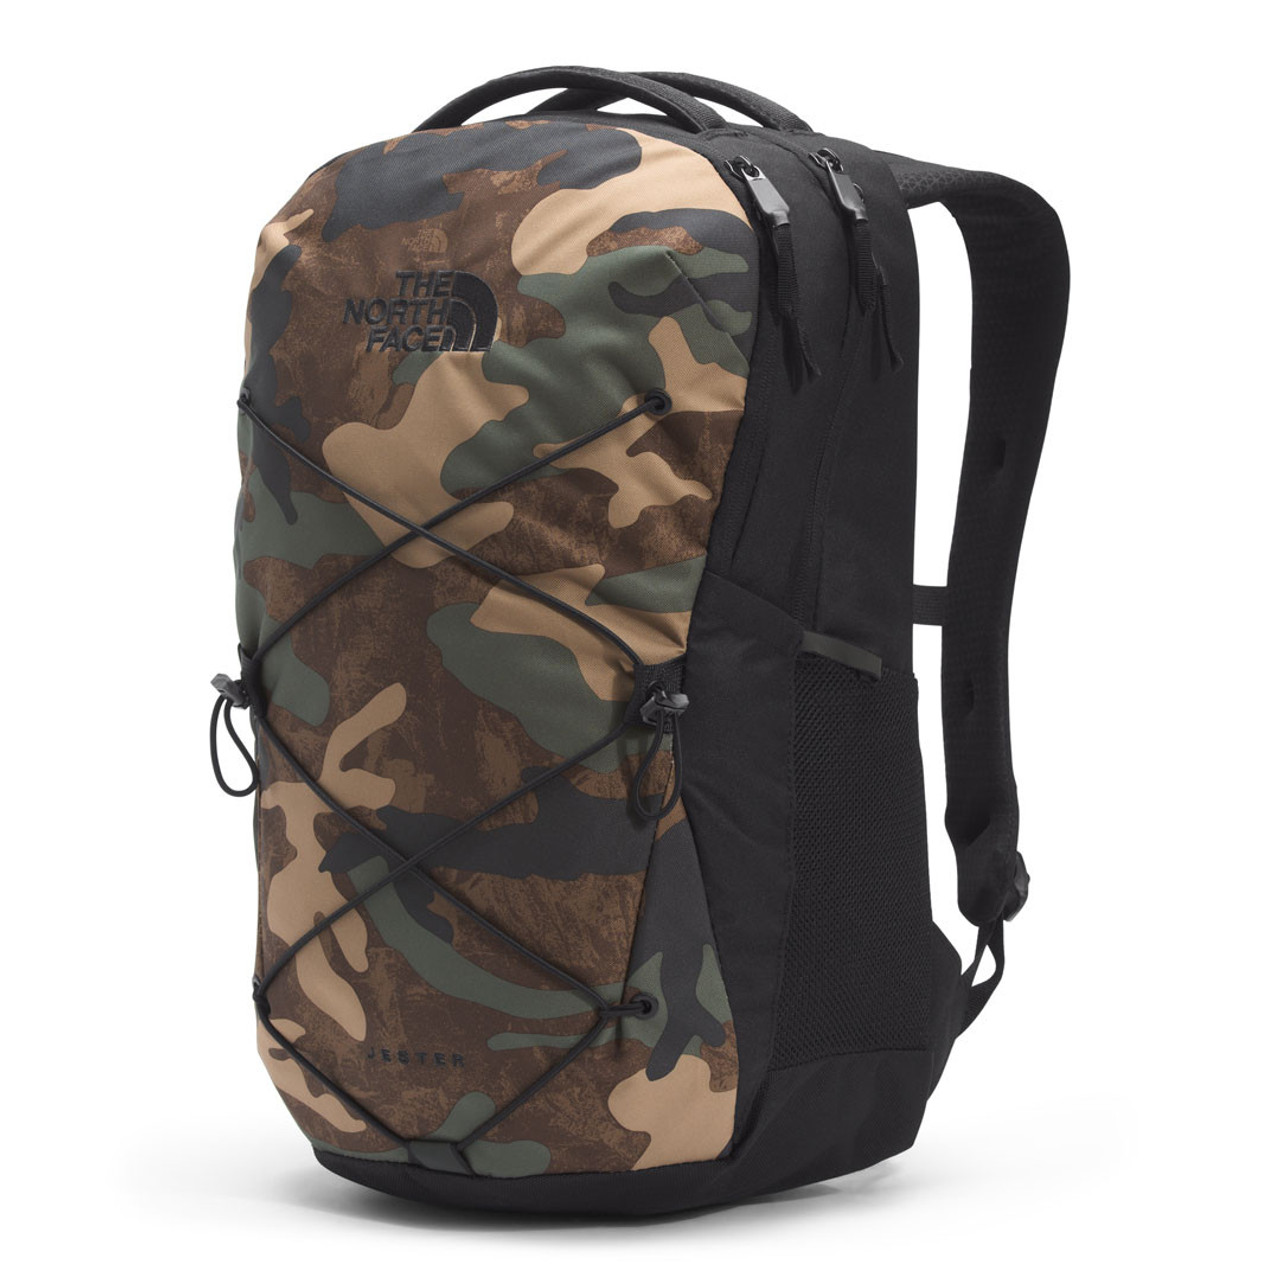 Vergelden actie kalender The North Face The North Face Jester Backpack - Kep Tan TNF Camp Print $ 69  | TYLER'S